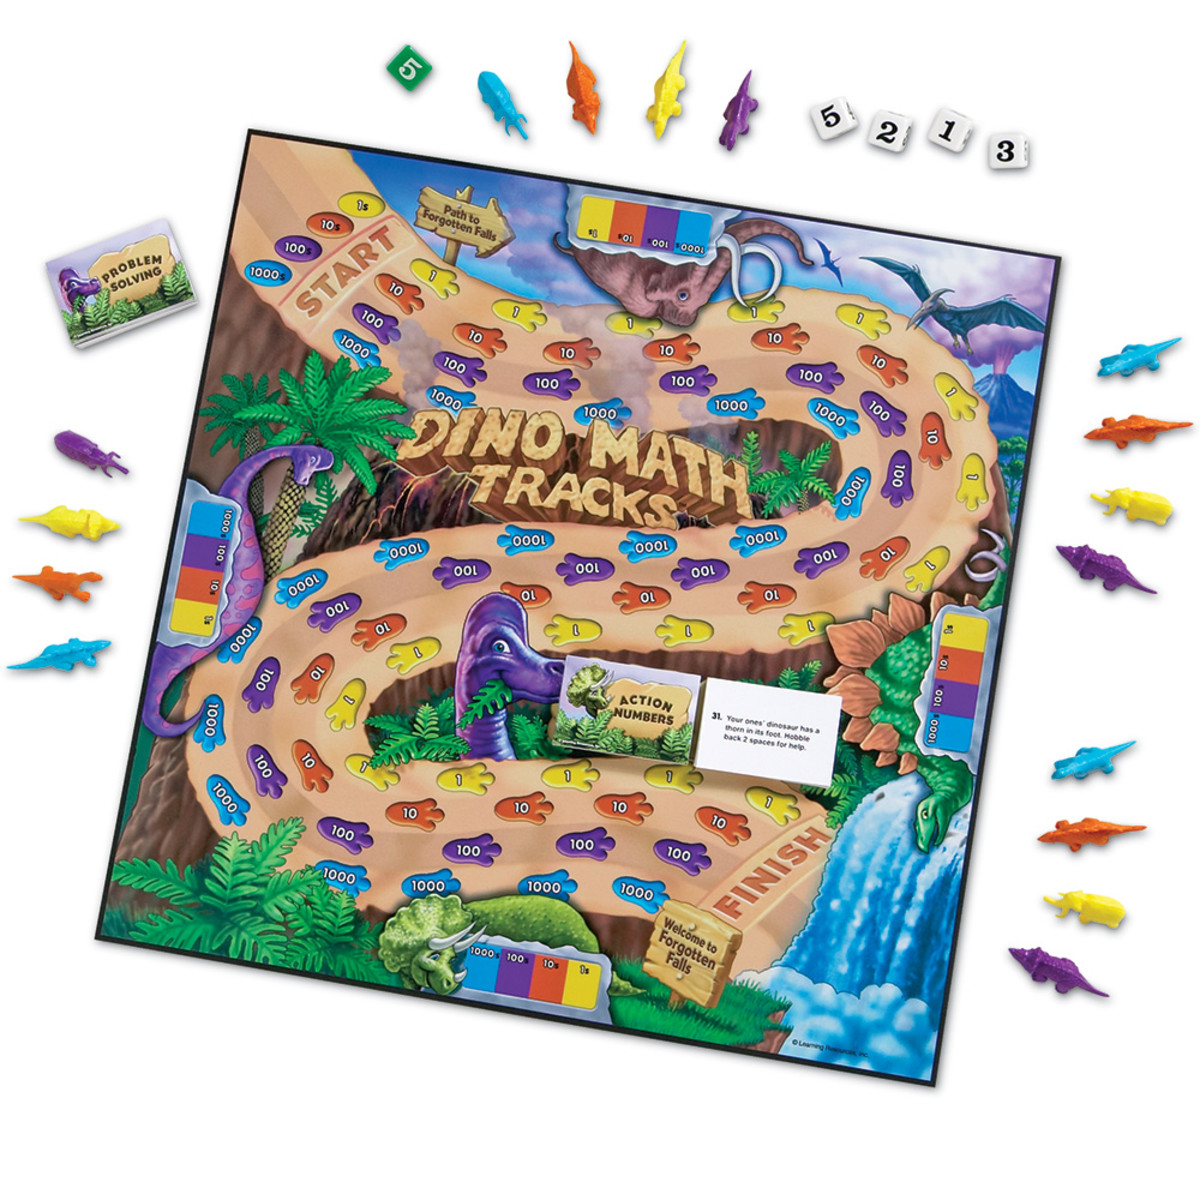 Image credit for Dino Math Tracks, which teaches place value: http://www.clevershoppers.com/index.php?main_page=product_info&products_id=13460